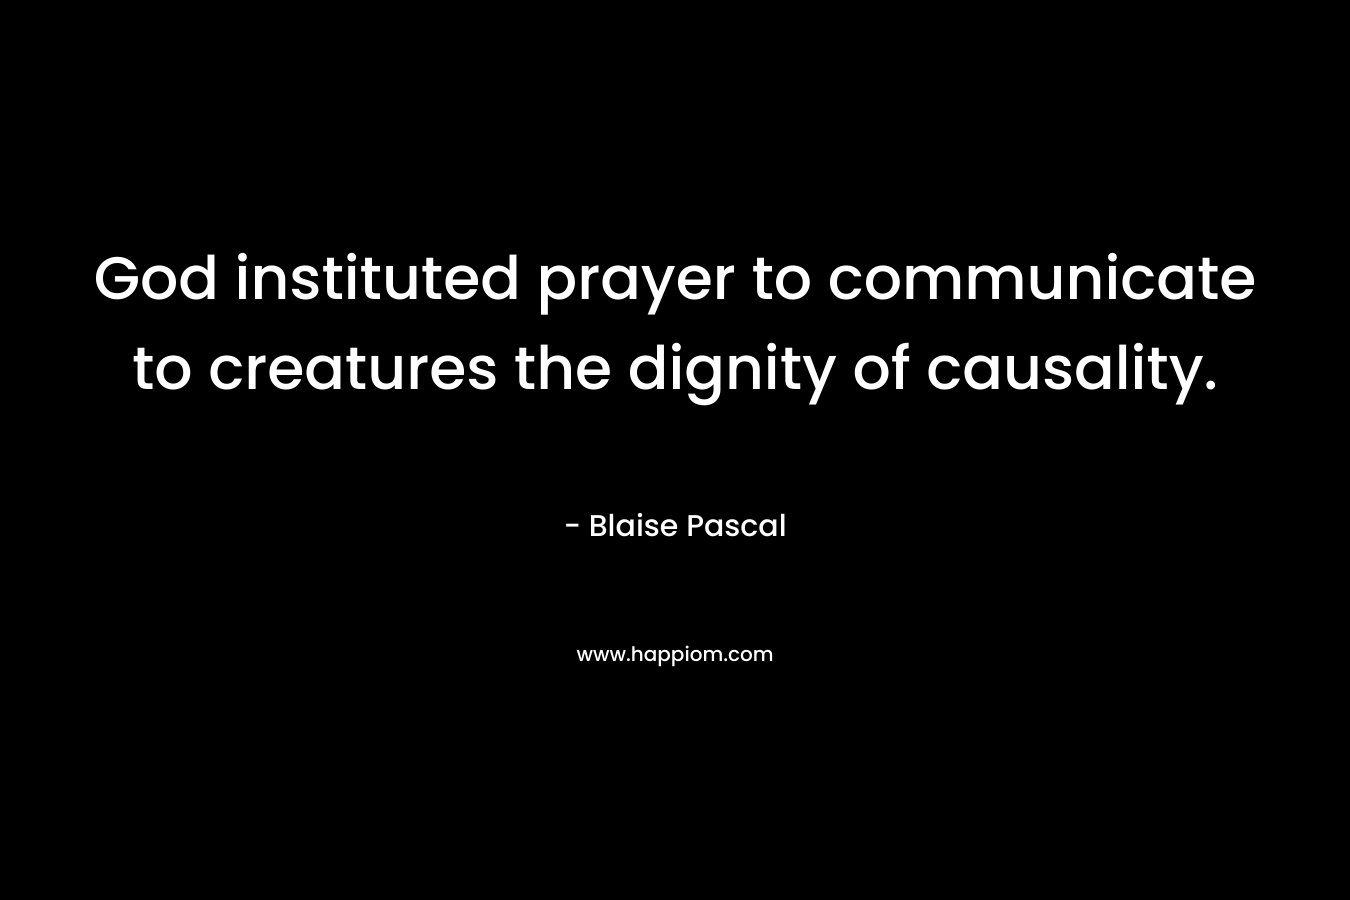 God instituted prayer to communicate to creatures the dignity of causality.